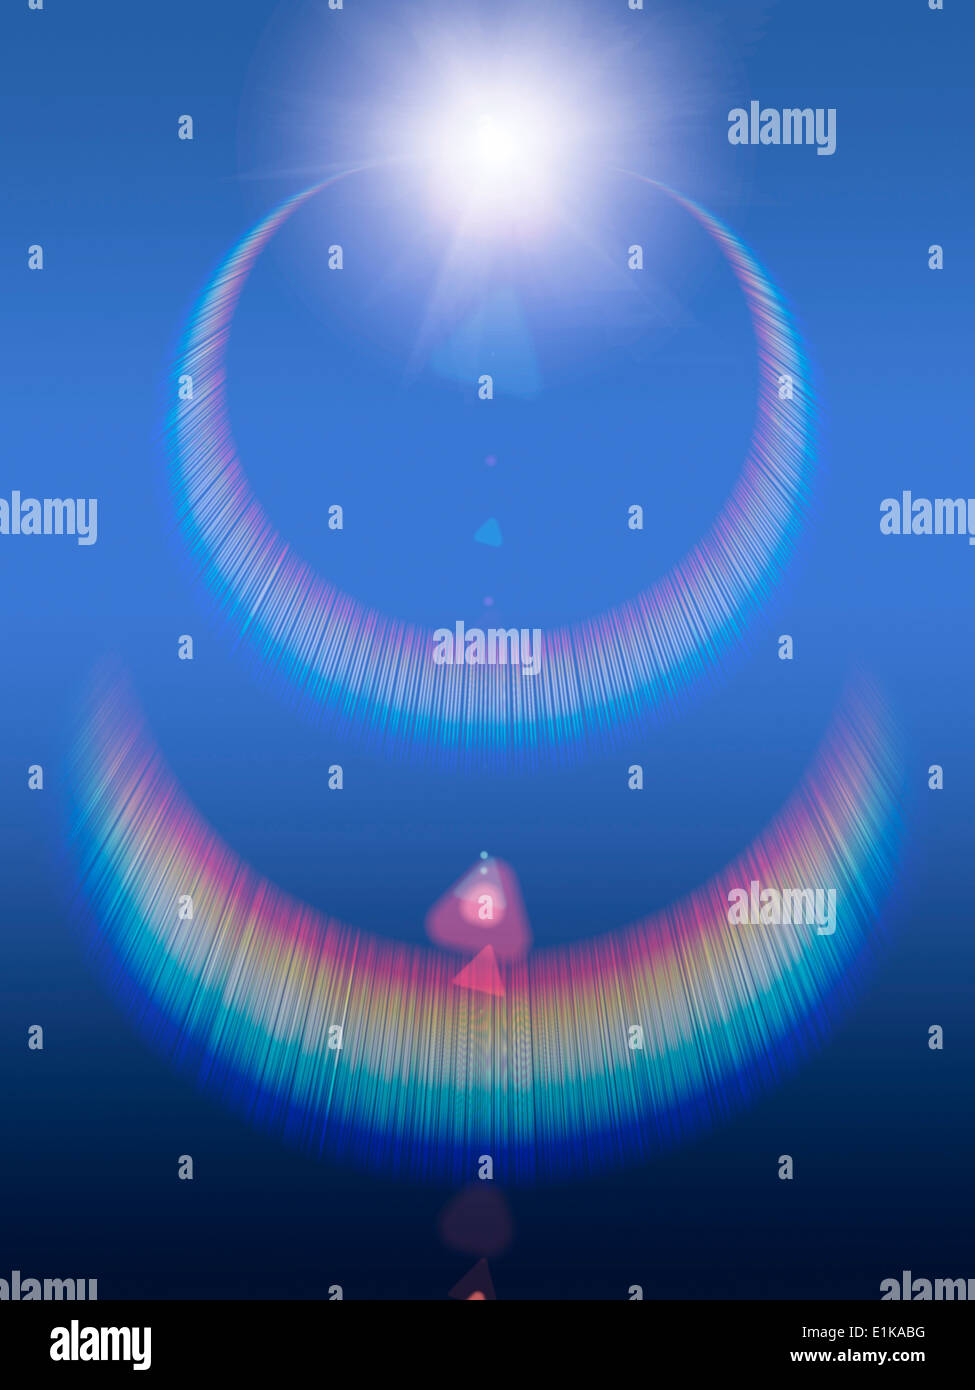 Computer artwork of a bright light source causing colourful chromatic reflections. Stock Photo